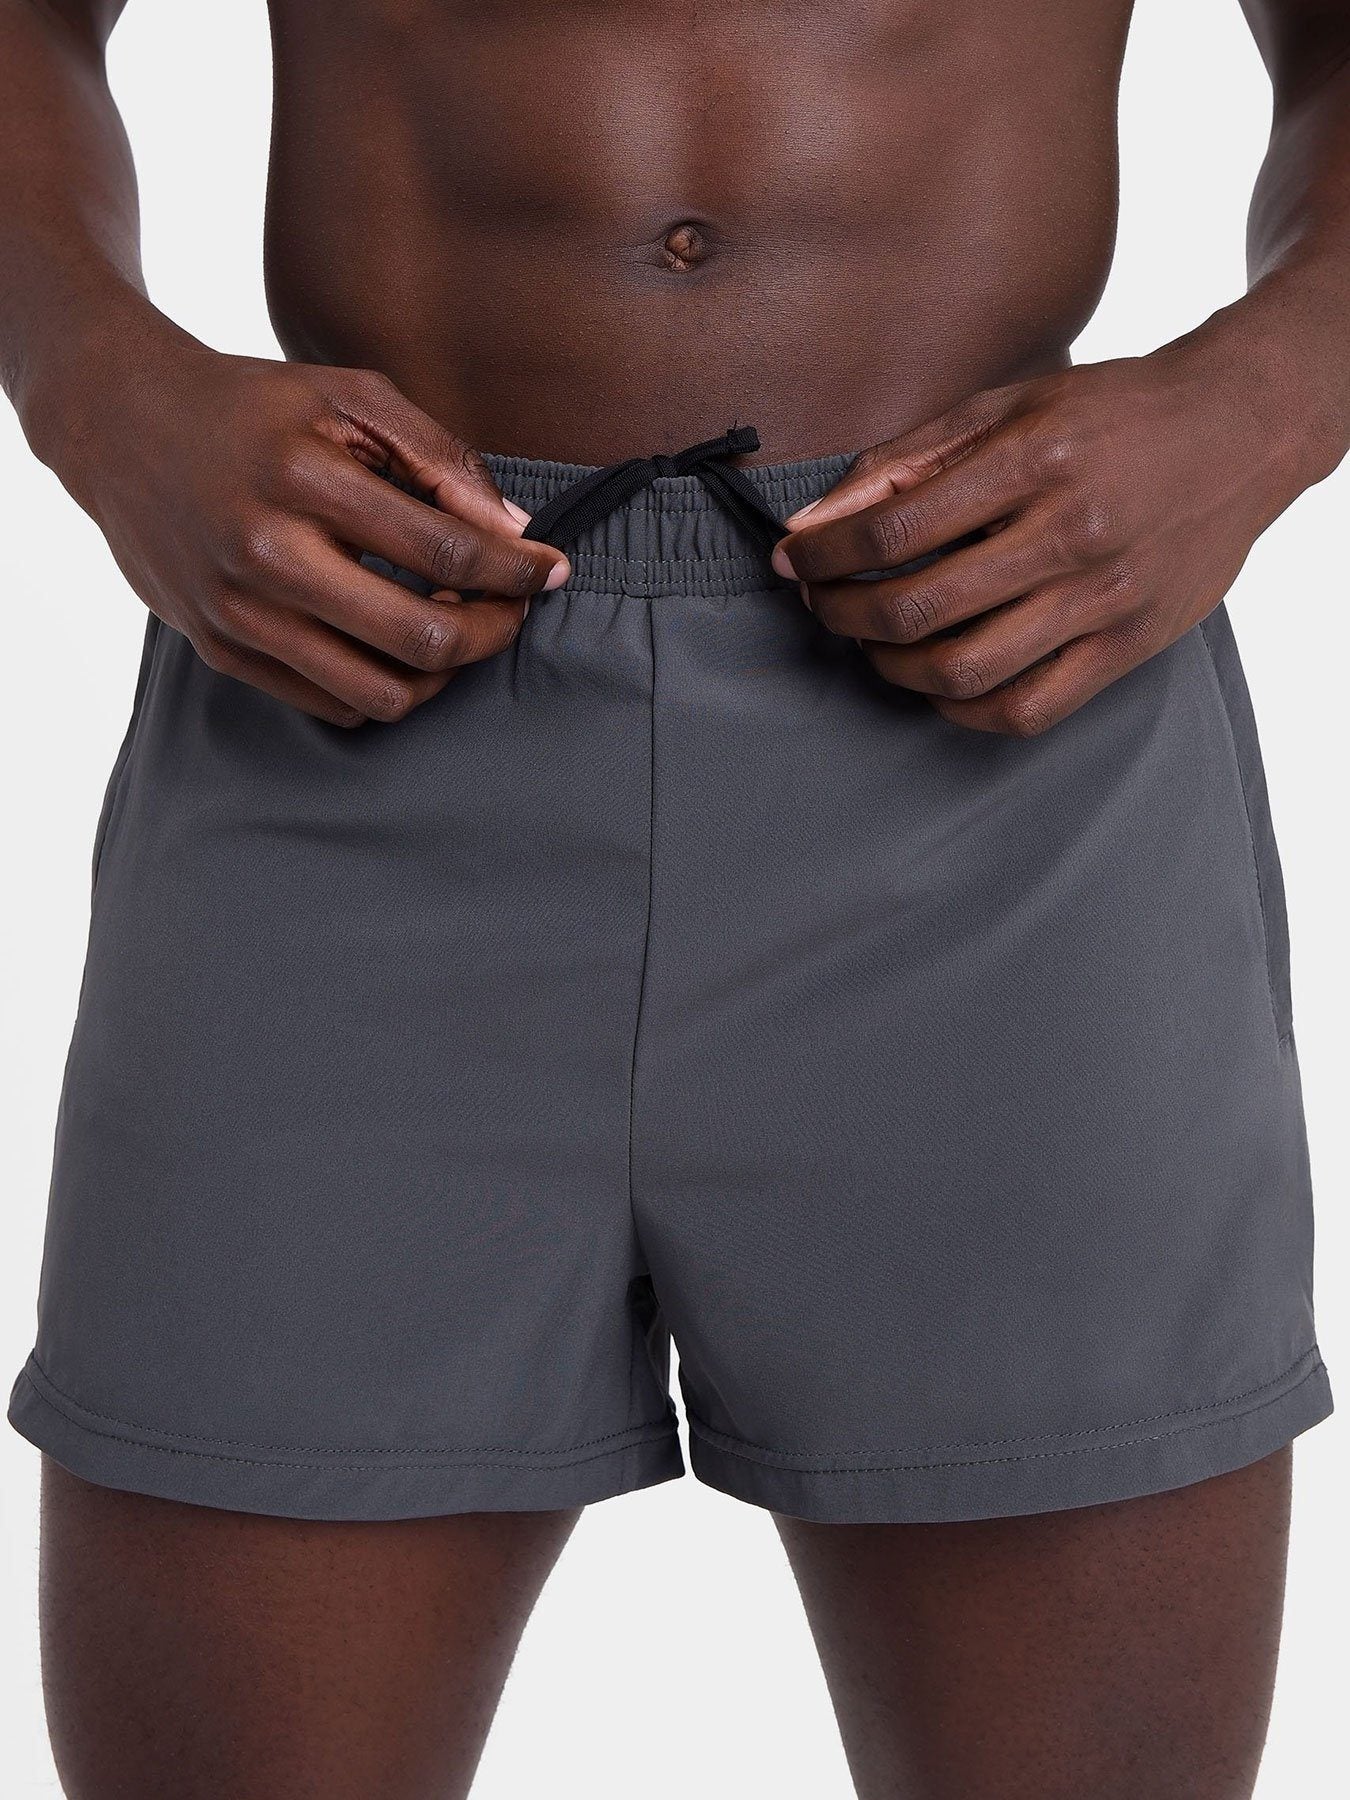 Pace Running Short for Men with Side Zip Pockets & Internal Netting